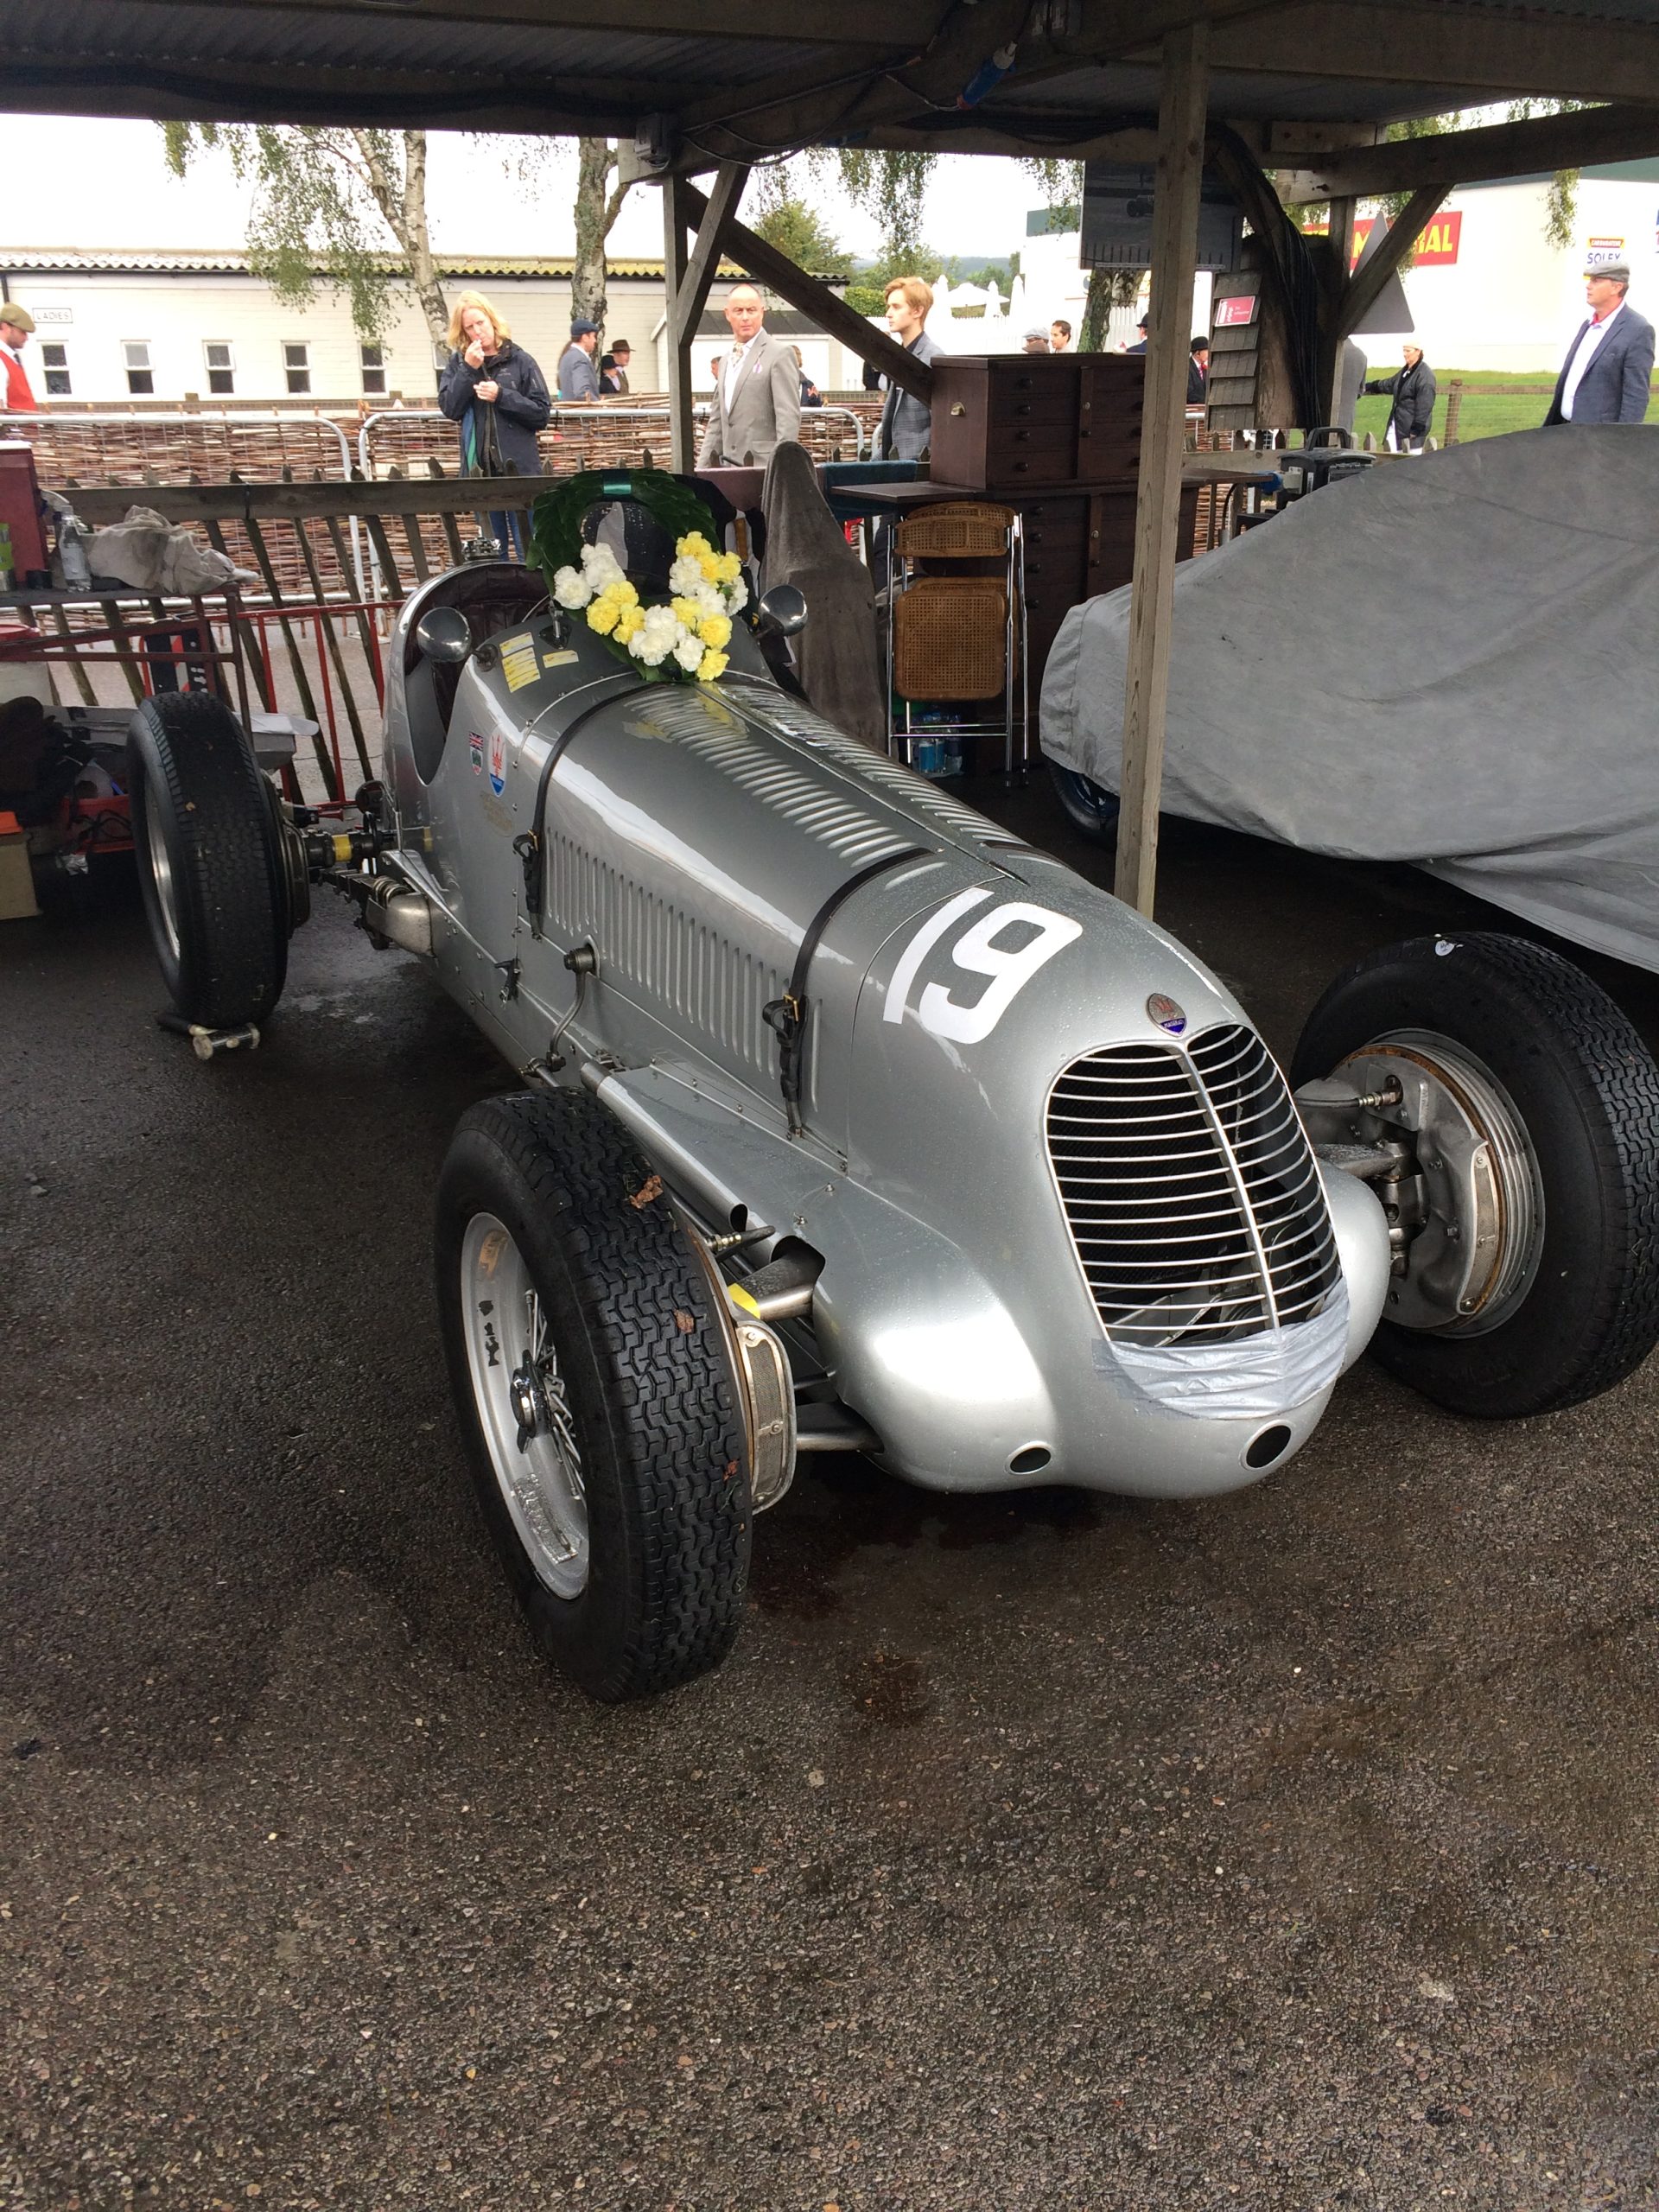 Maserati 6CM – Goodwood Revival 2016 winner – 1st place in Goodwood Trophy race